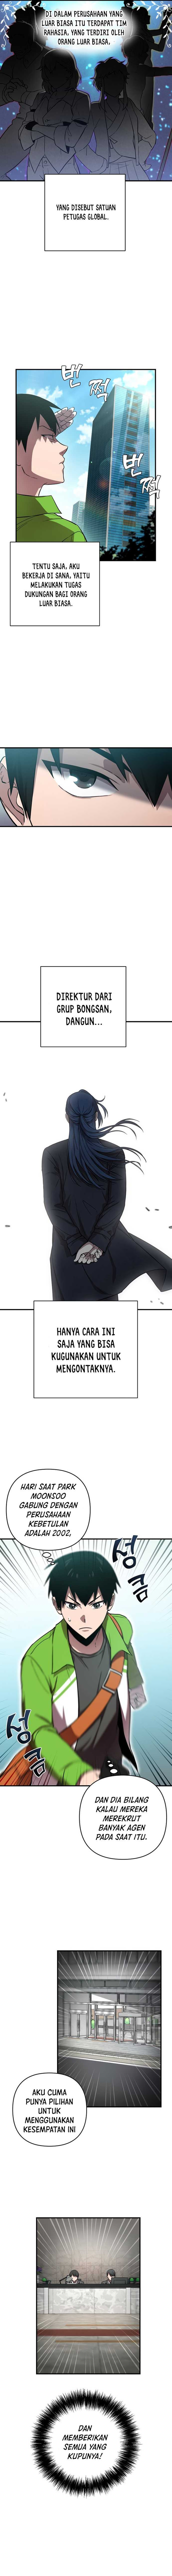 Cursed Manager’s Regression Chapter 04